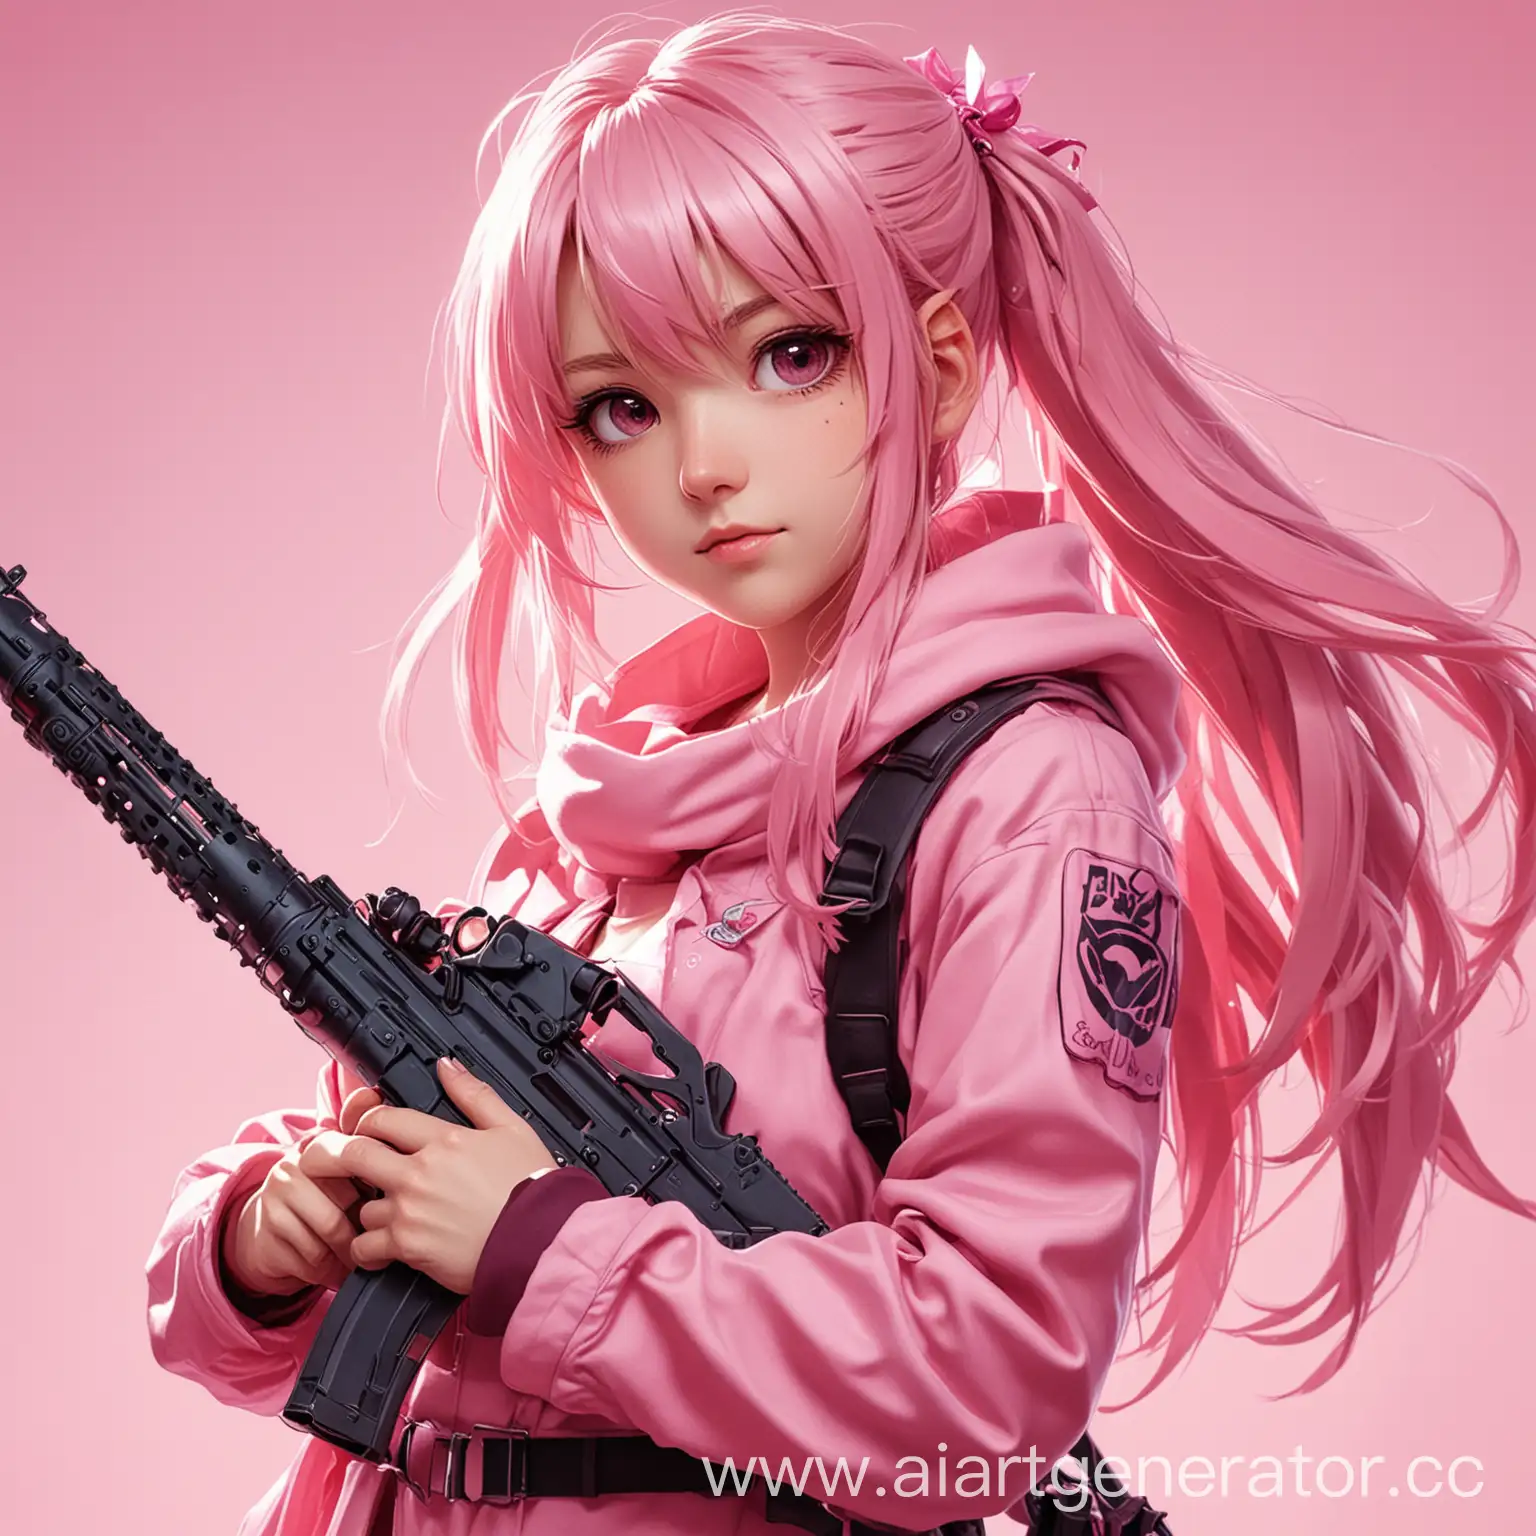 Anime-Girl-with-Pink-Weapon-Playful-Fighter-in-Vibrant-Shades